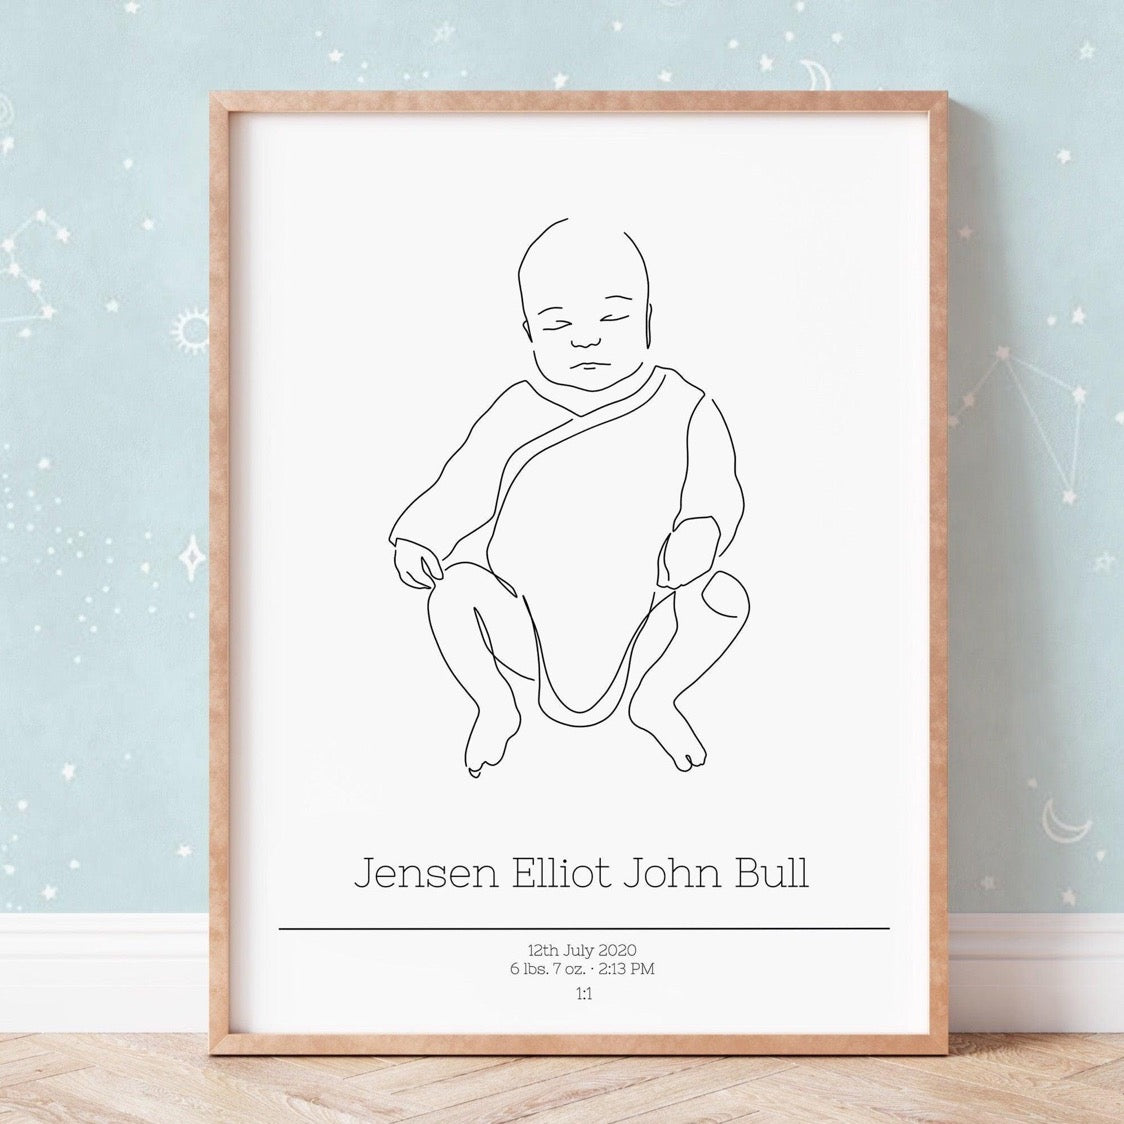 Minimalist custom made birth poster with a line art illustration of the baby. Scale 1:1